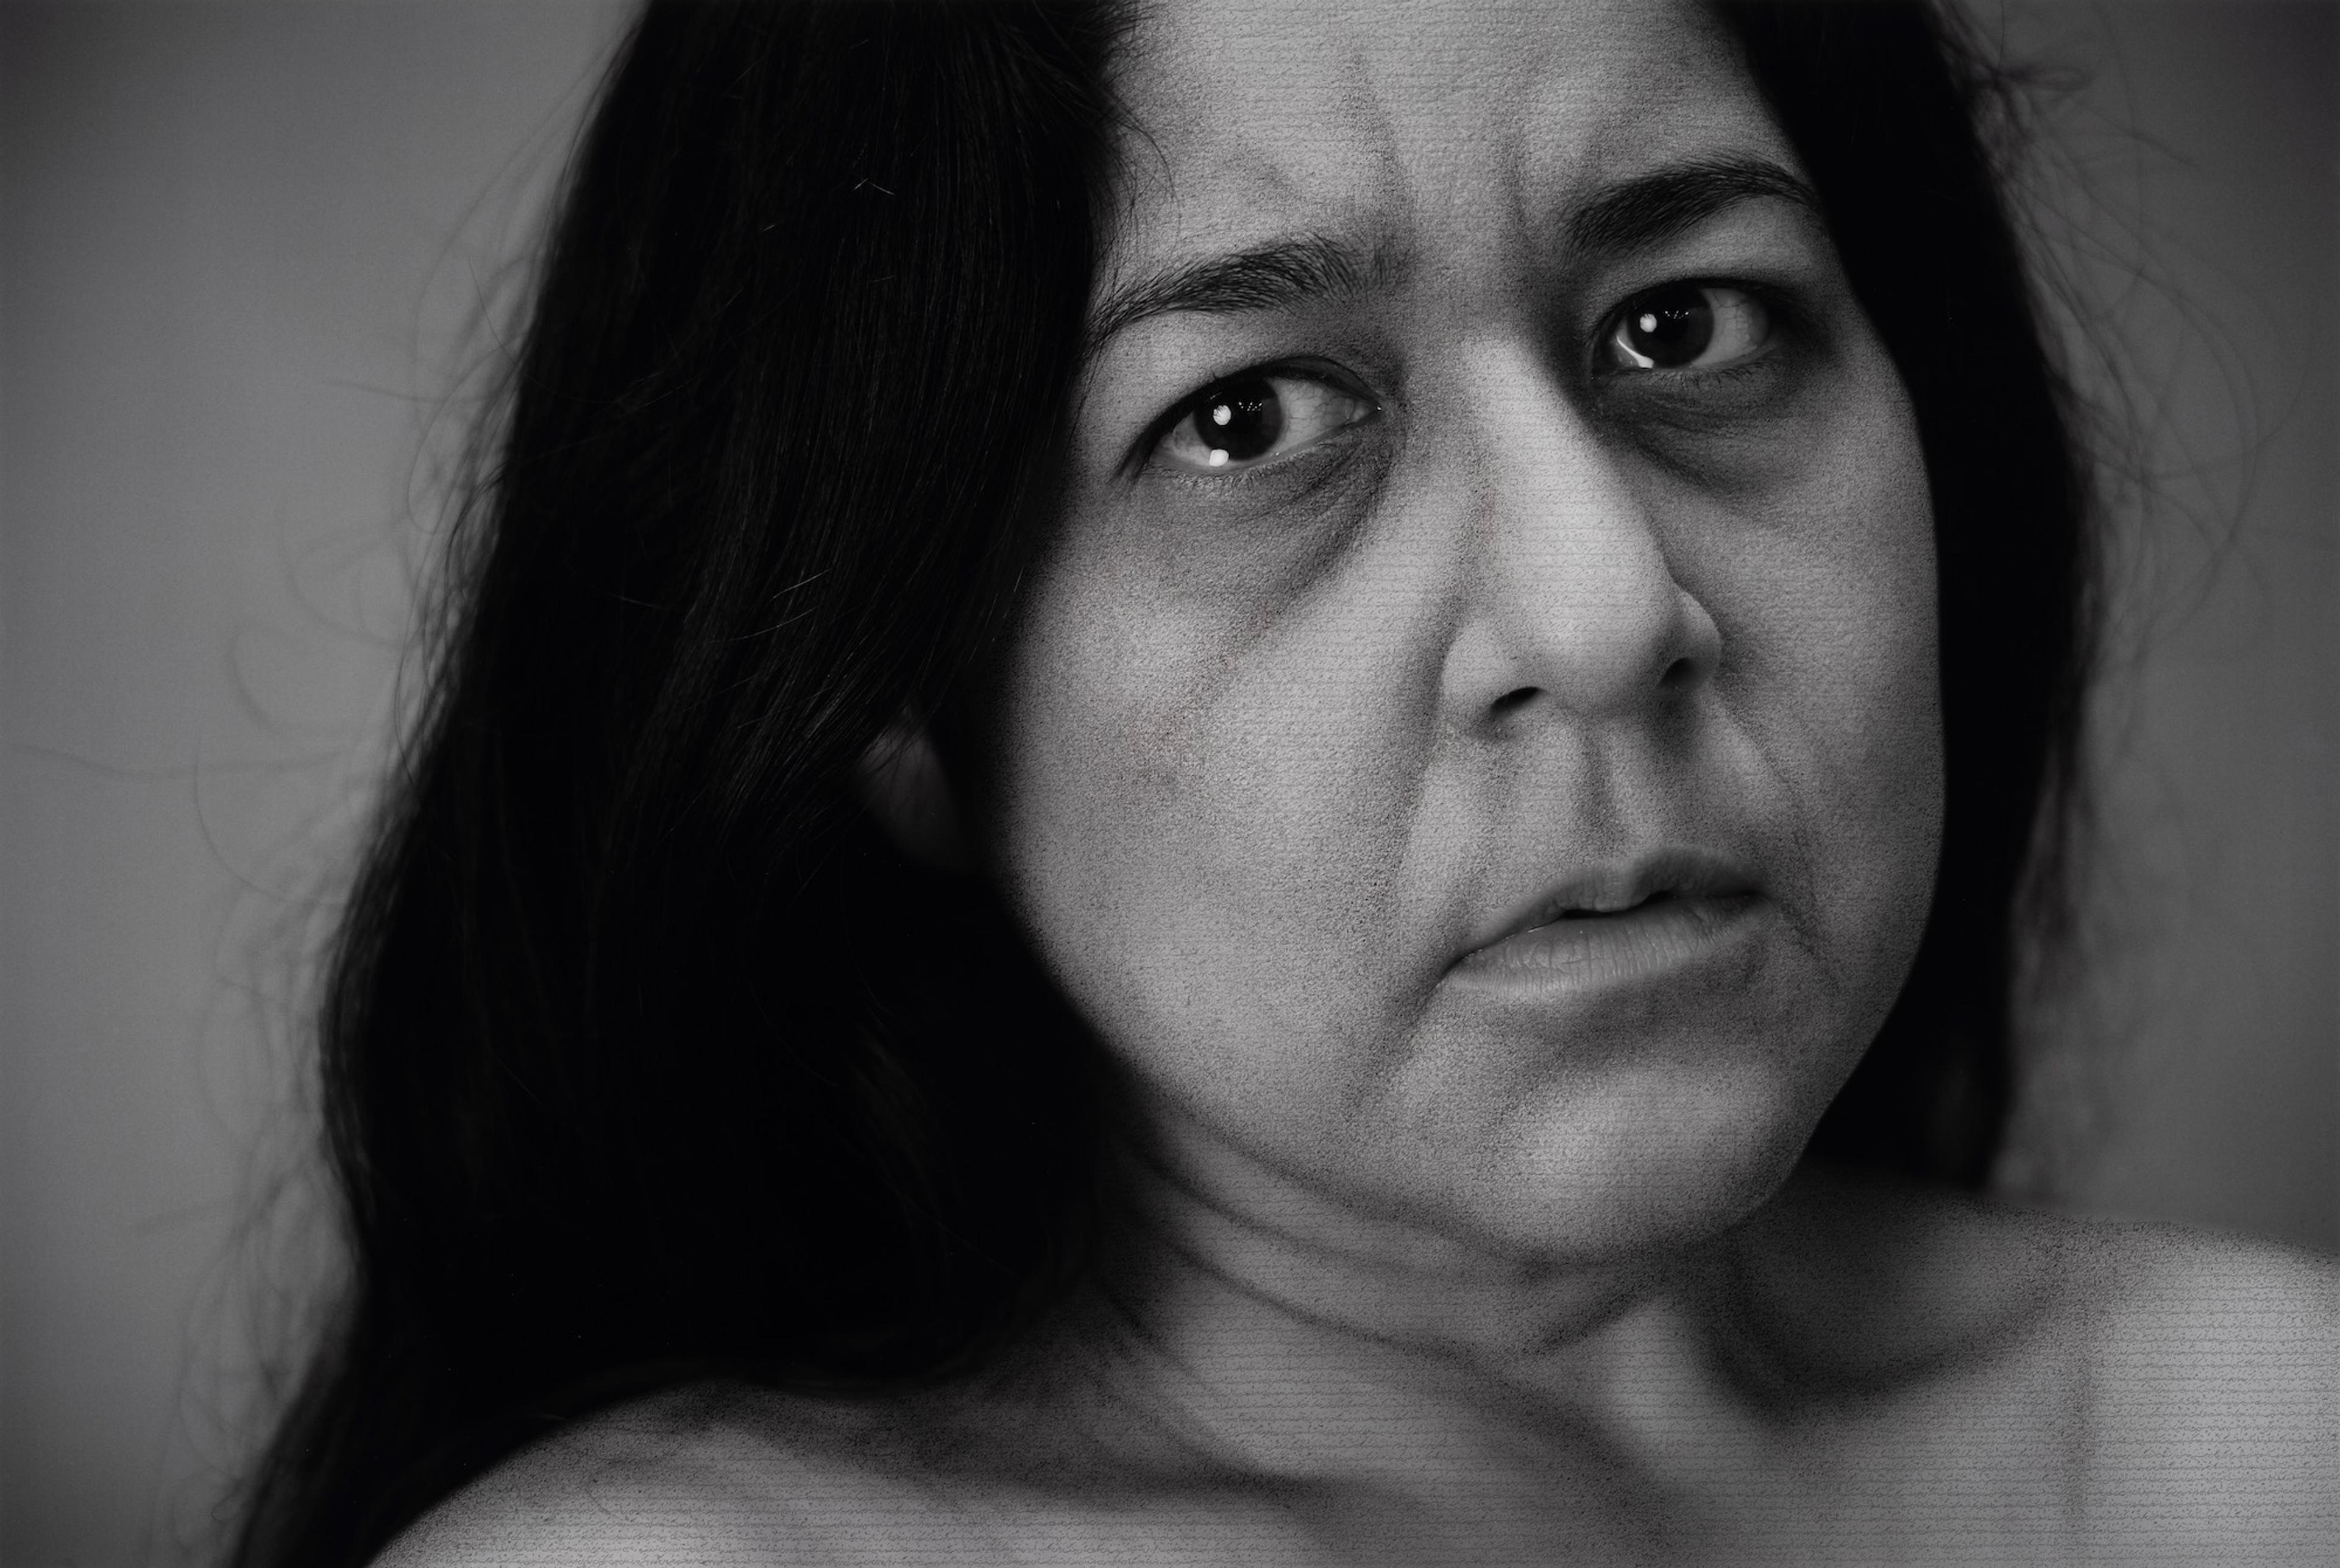 A black and white portrait of a woman, looking concerned into the camera.